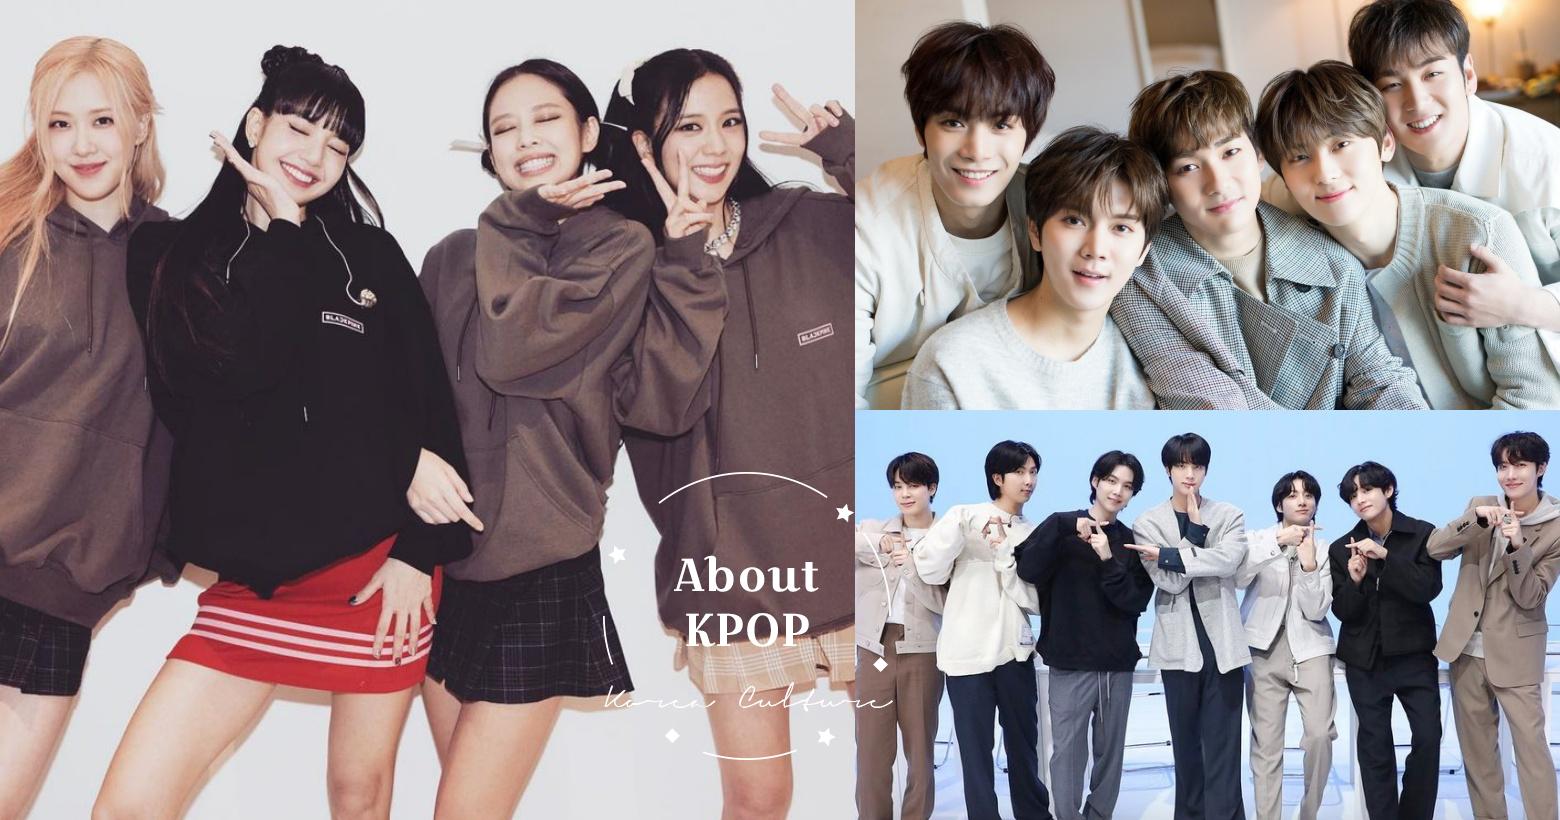 The Global Rise of K-Pop: Kpop Idols and Social Media Influence